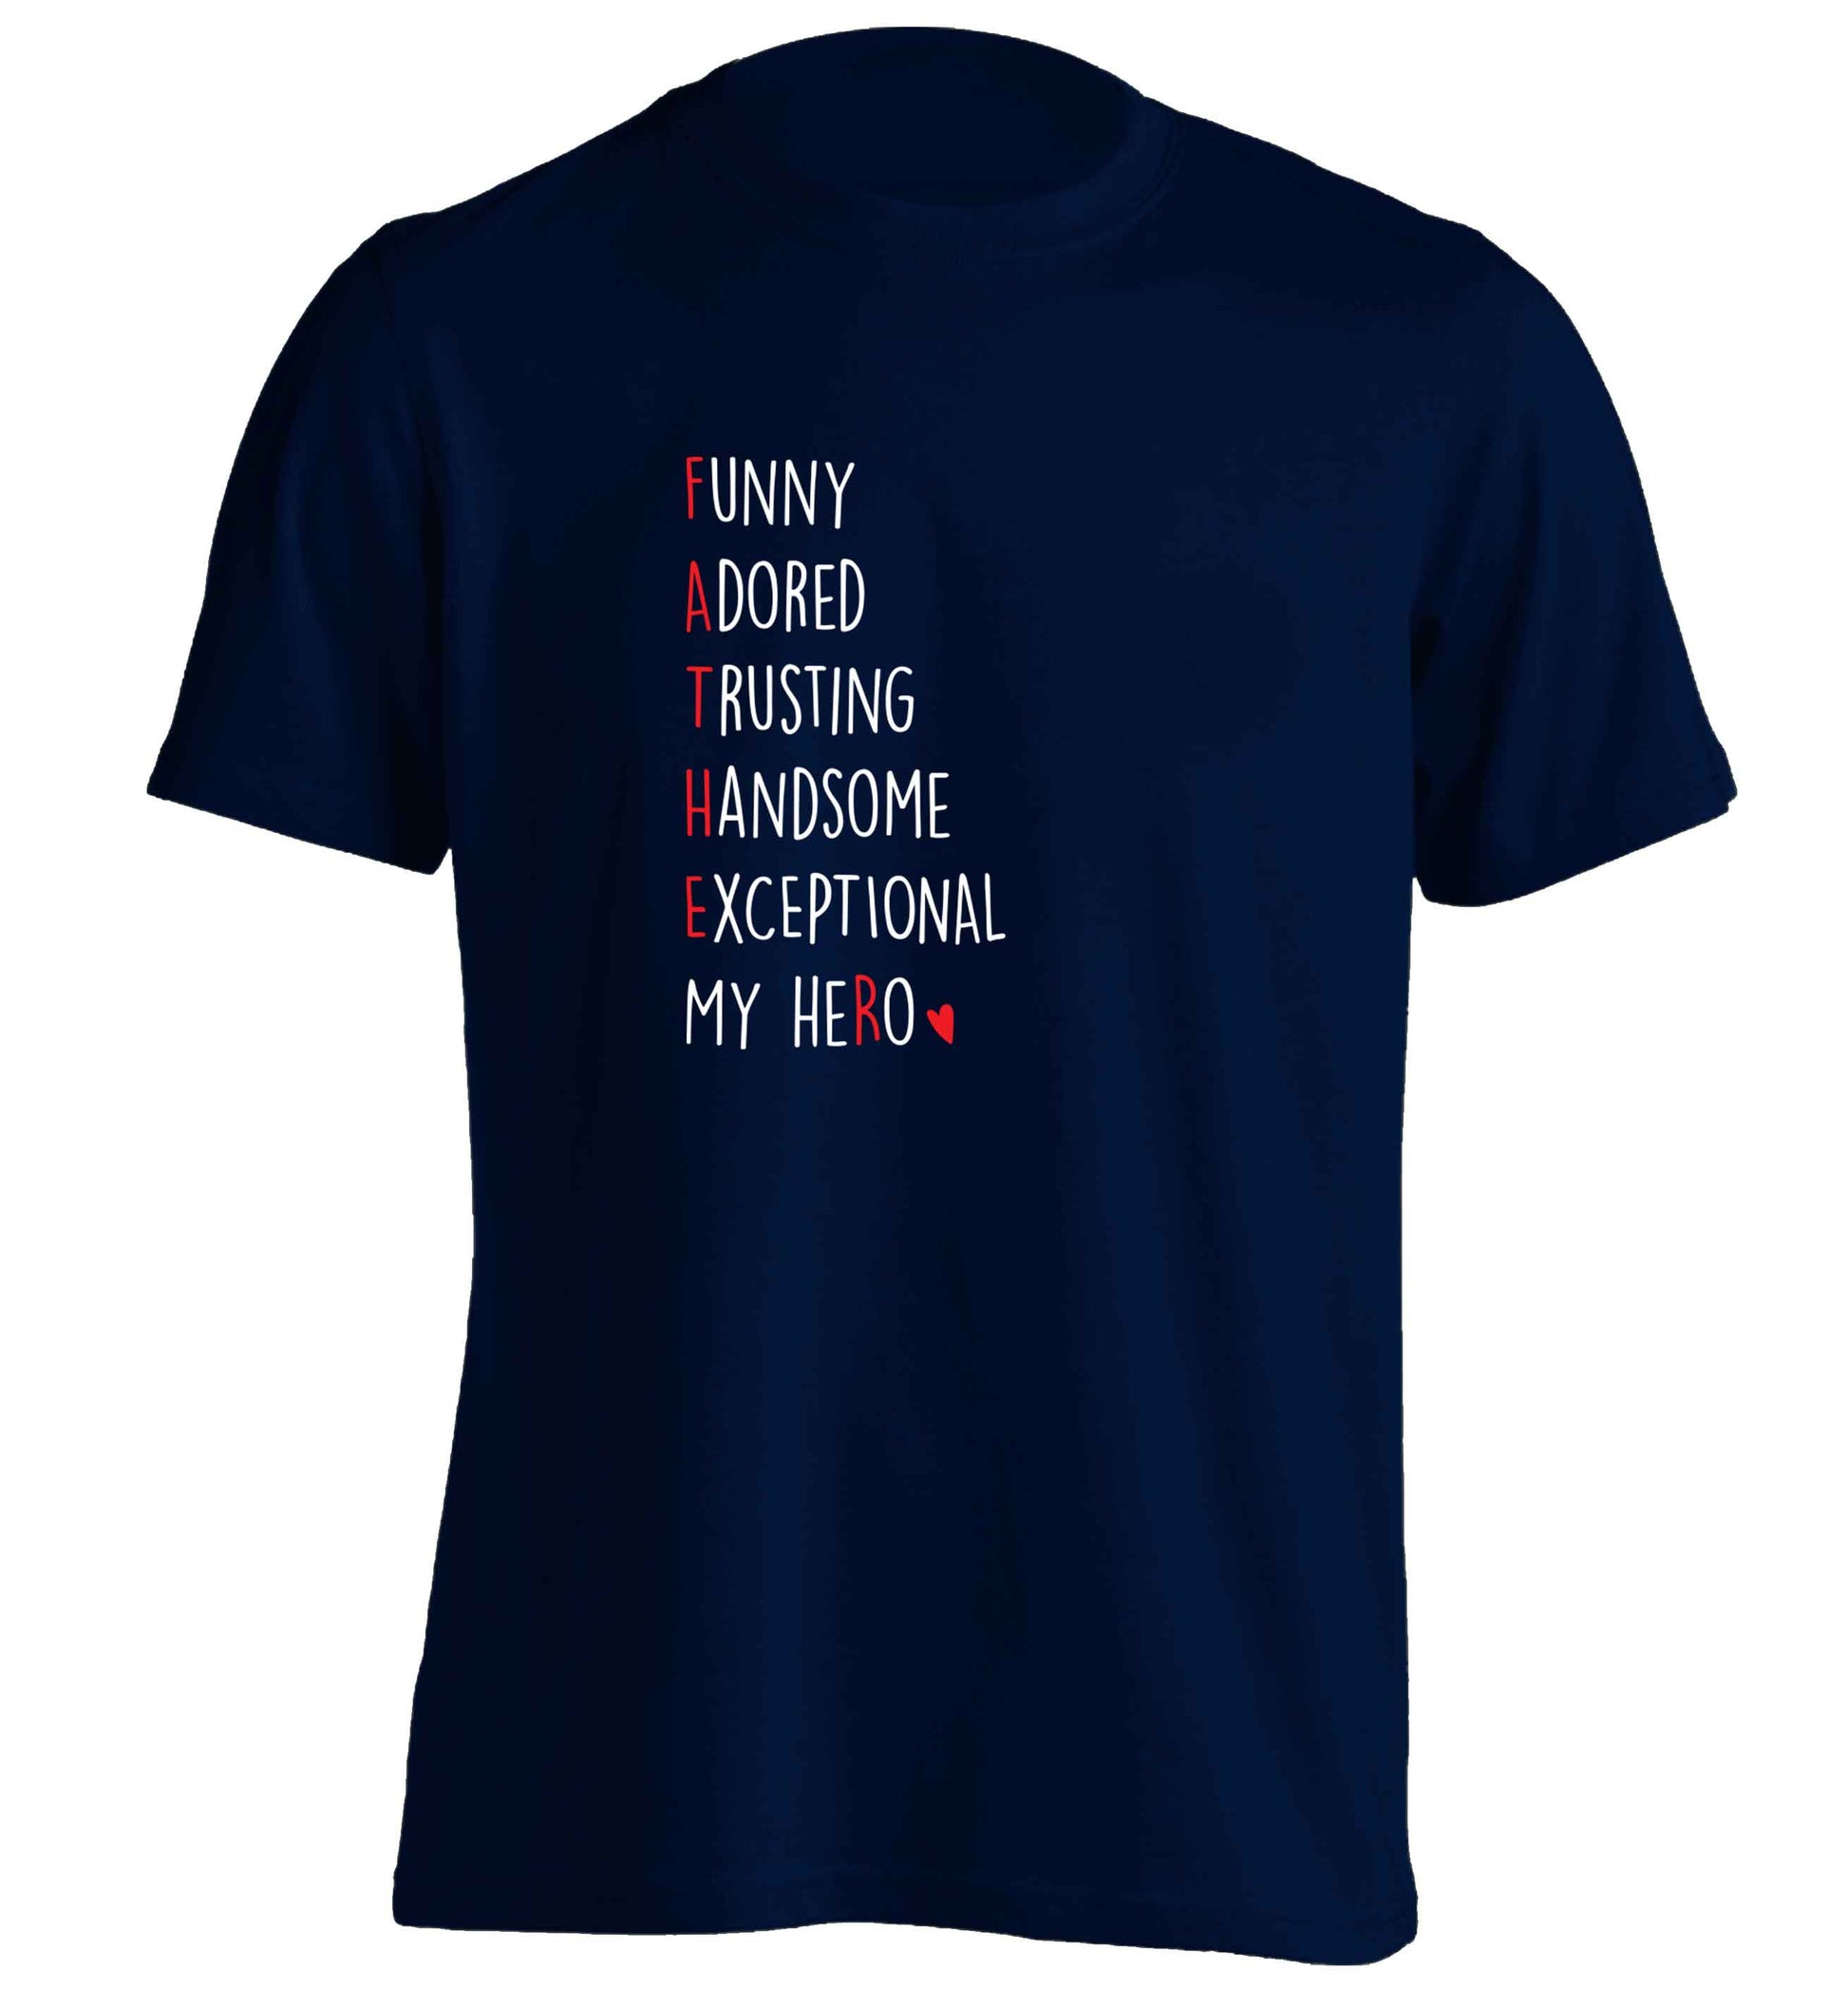 Father, funny adored trusting handsome exceptional my hero adults unisex navy Tshirt 2XL